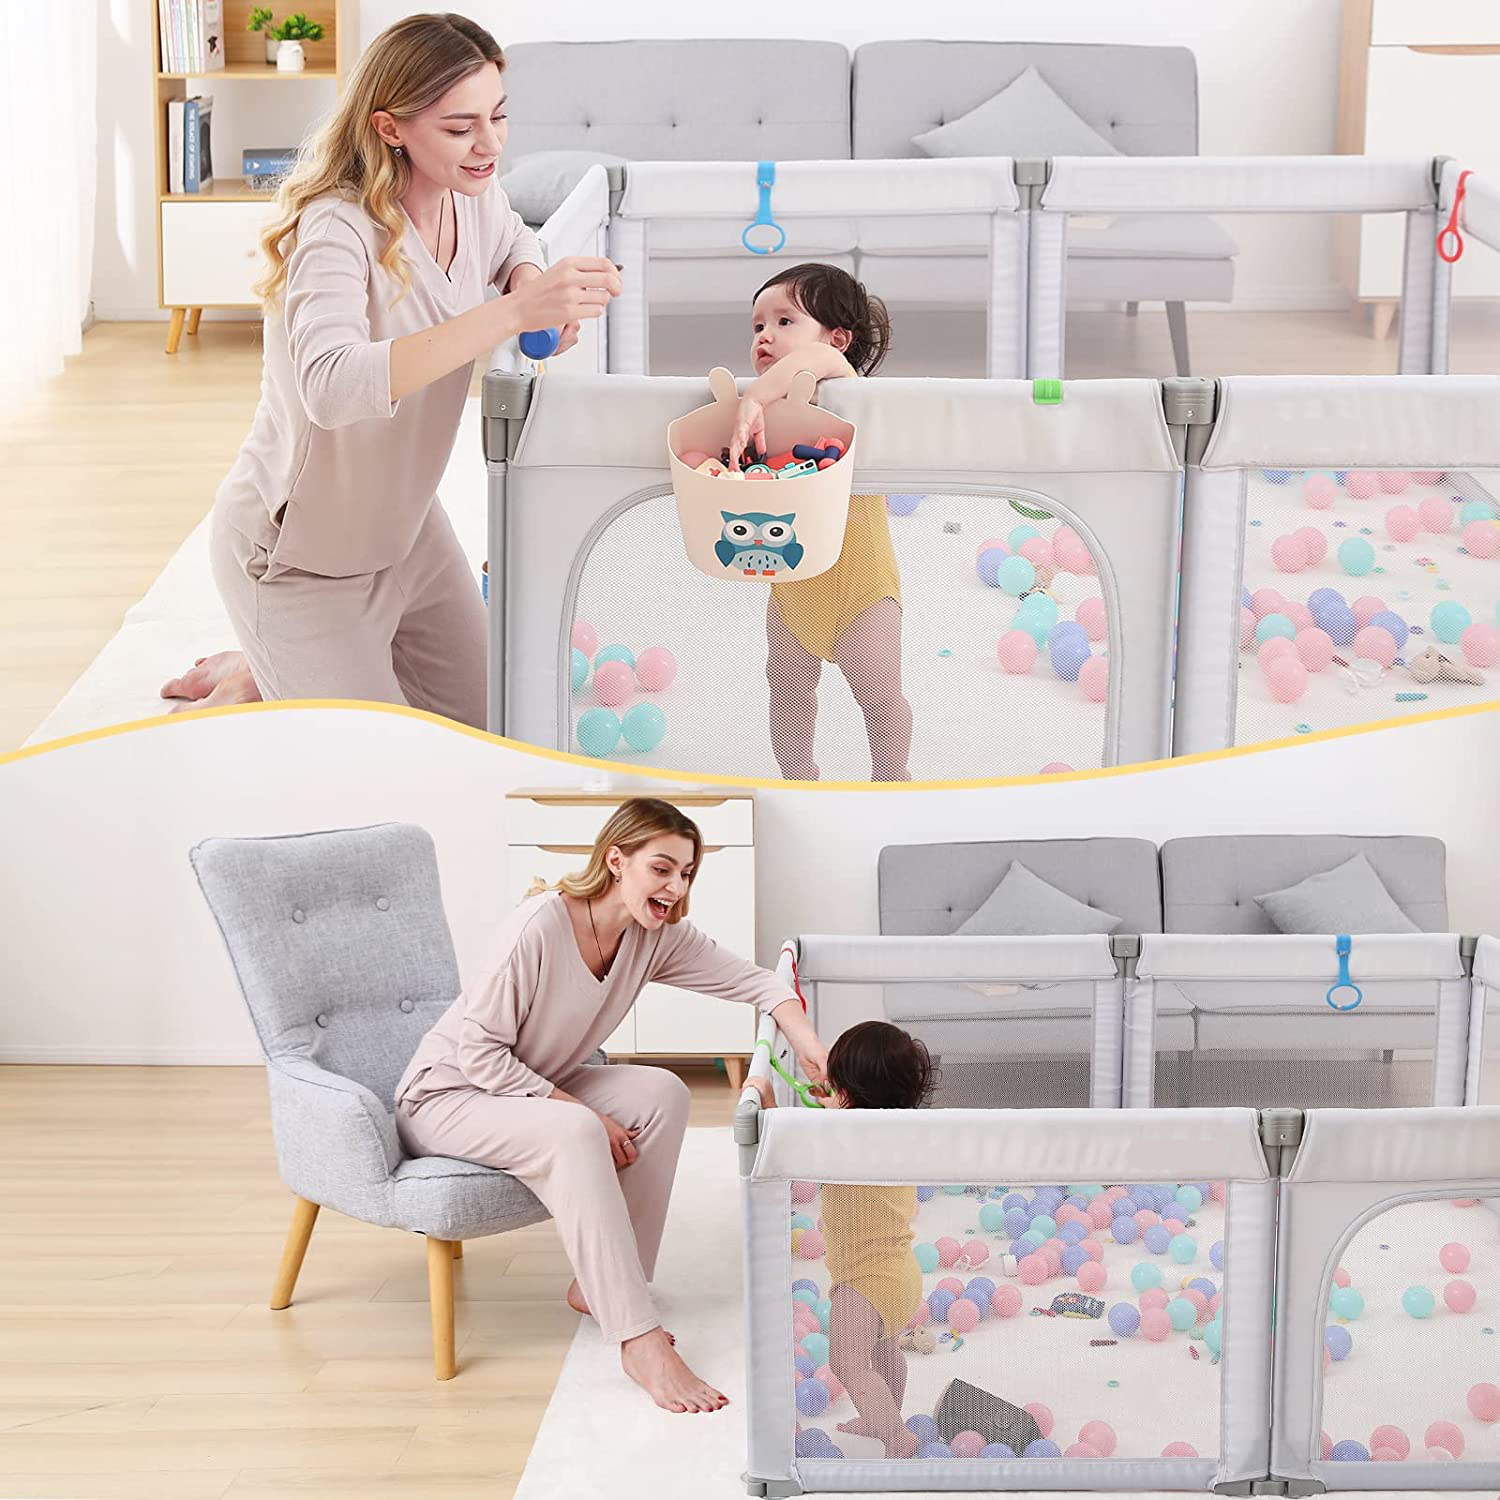 acplaypen Foldable Baby Playpen, Play Pens for Babies and Toddlers, with 4 Pull Rings and 1 Storage Box, Large Playards for Easy Installation and Storage, Material Safety and Stability.